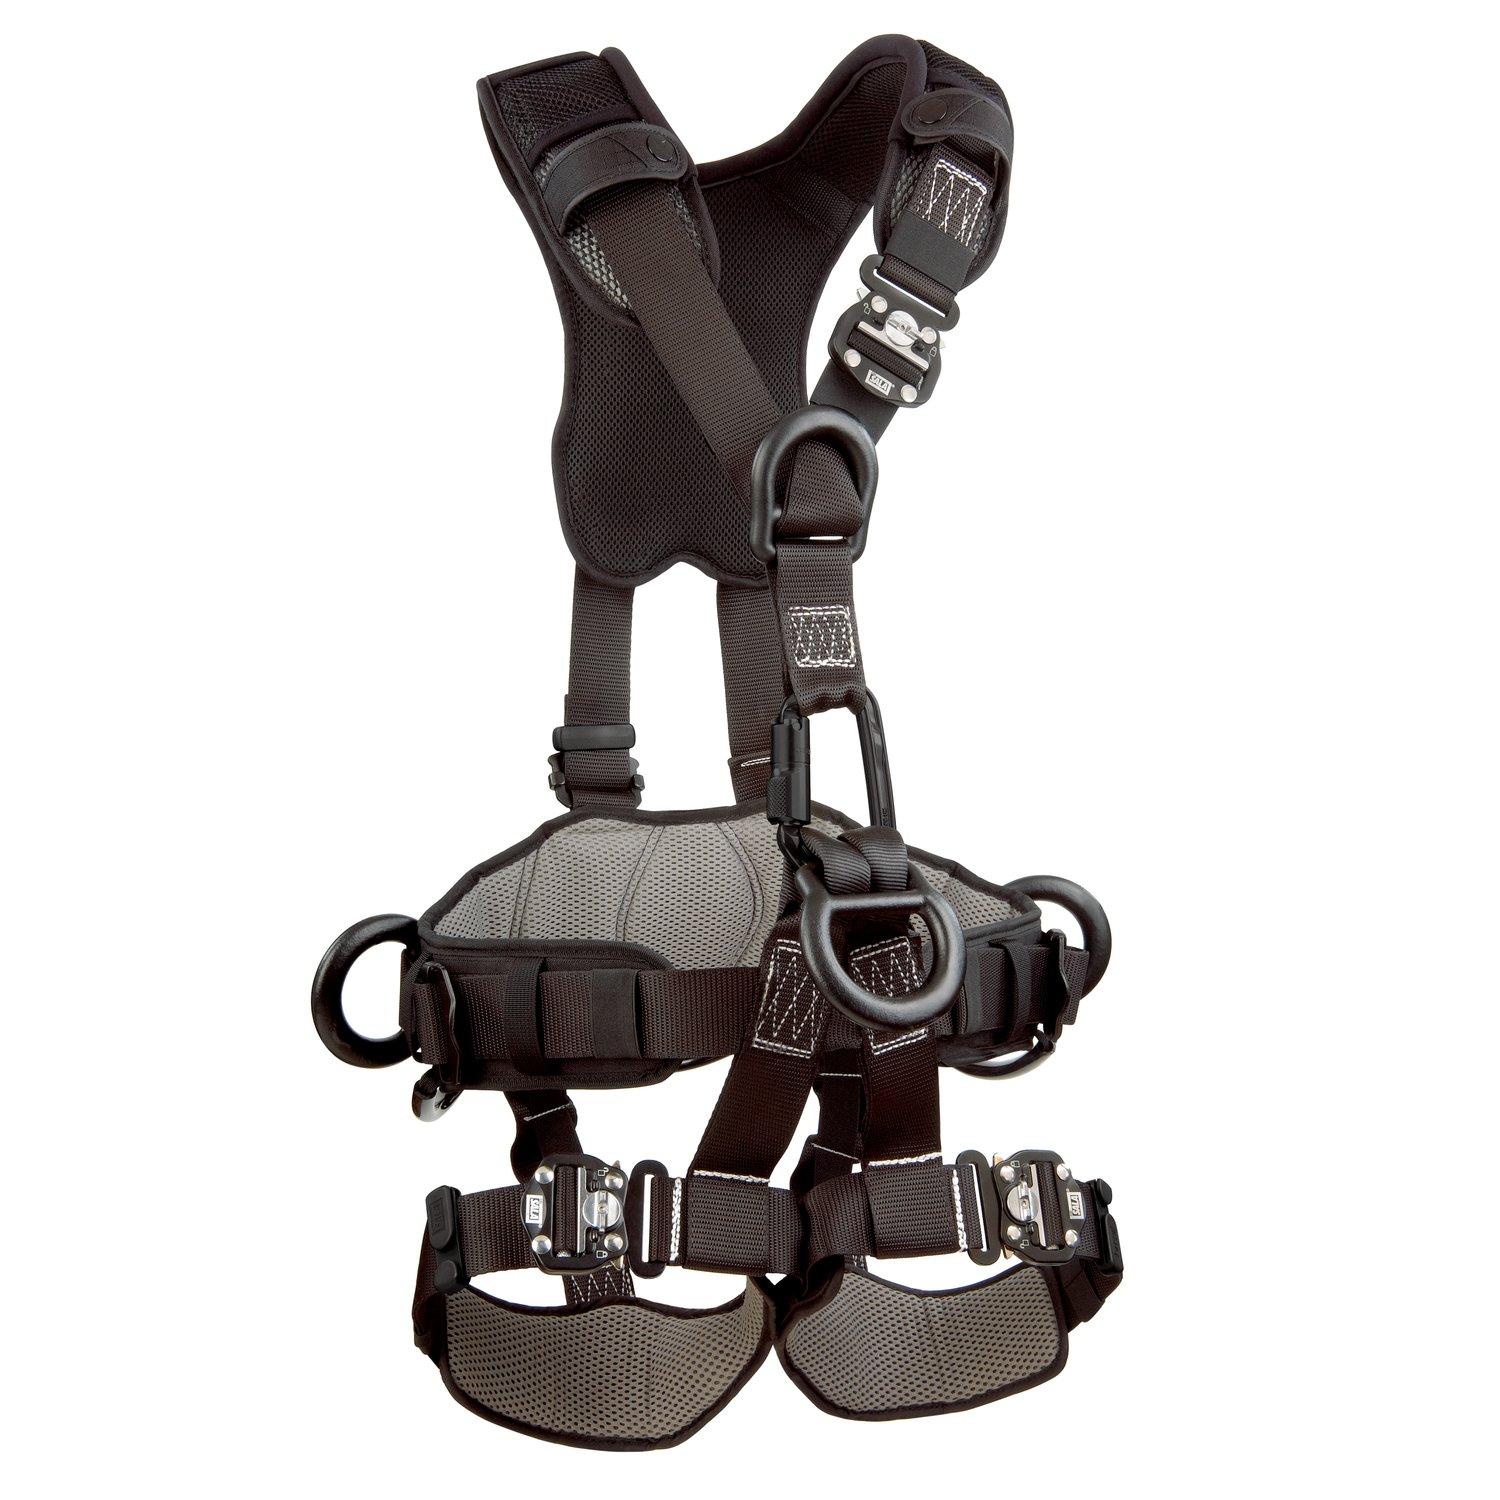 7012816344 - 3M DBI-SALA ExoFit NEX Comfort Rope Access Climbing/Positioning/Rescue/Suspension Safety Harness 1113373, Black, X-Large